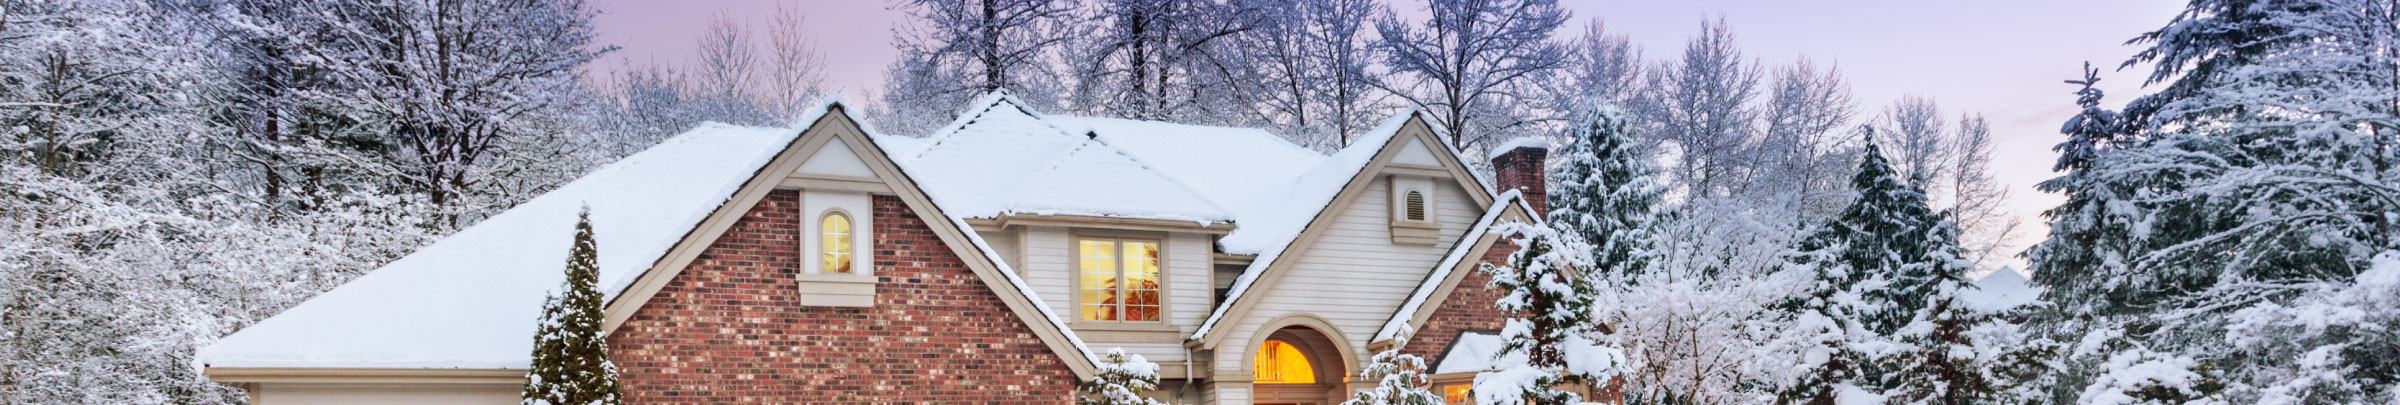 Stay comfortable all winter with B.F. Mahn taking care of your heating system service needs!